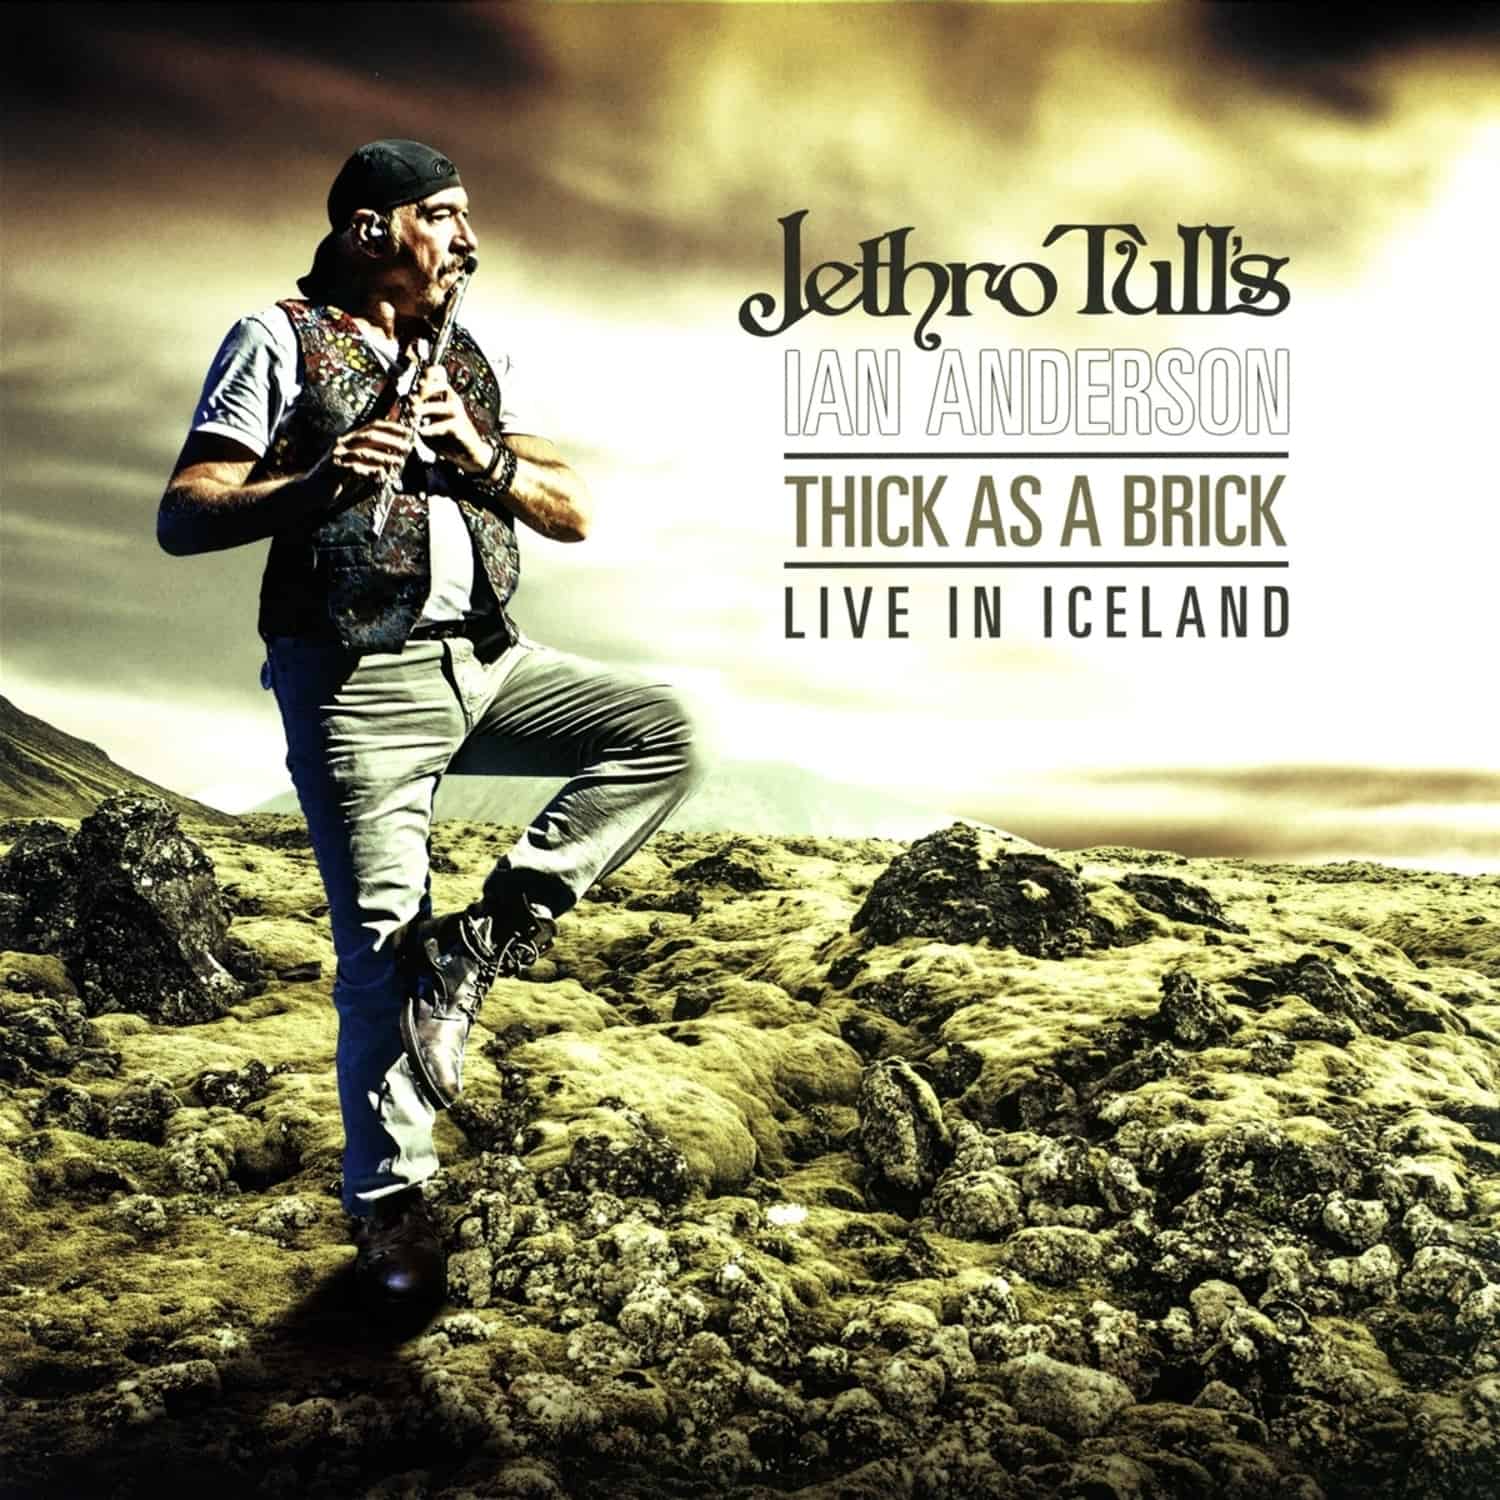 Jethro Tull s Ian Anderson - THICK AS A BRICK-LIVE IN ICELAND 